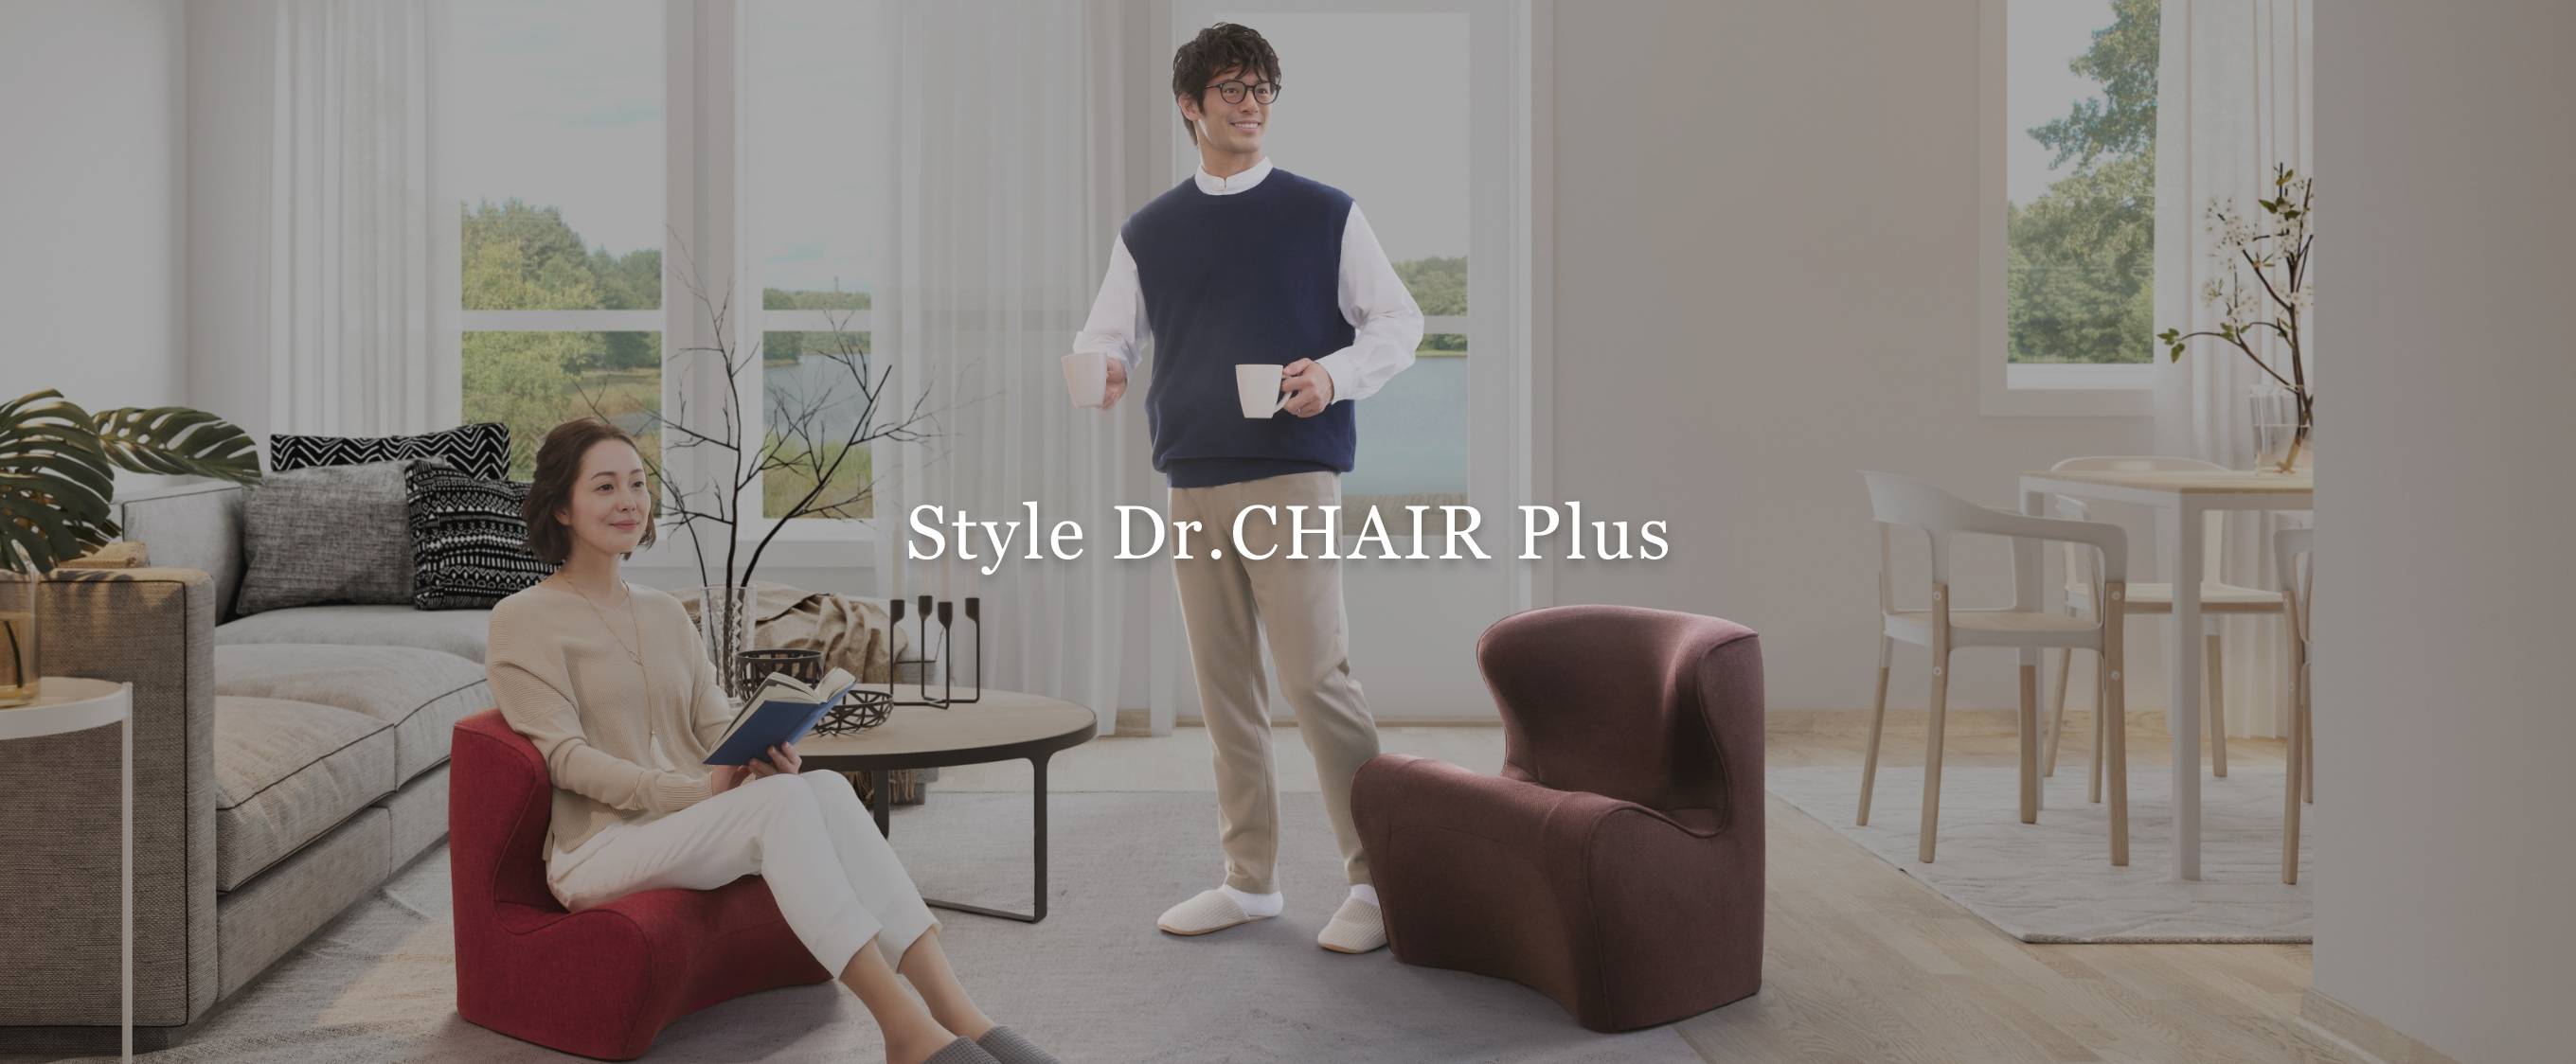 Style Dr.CHAIR Plus（スタイルドクターチェアプラス） | Style ...